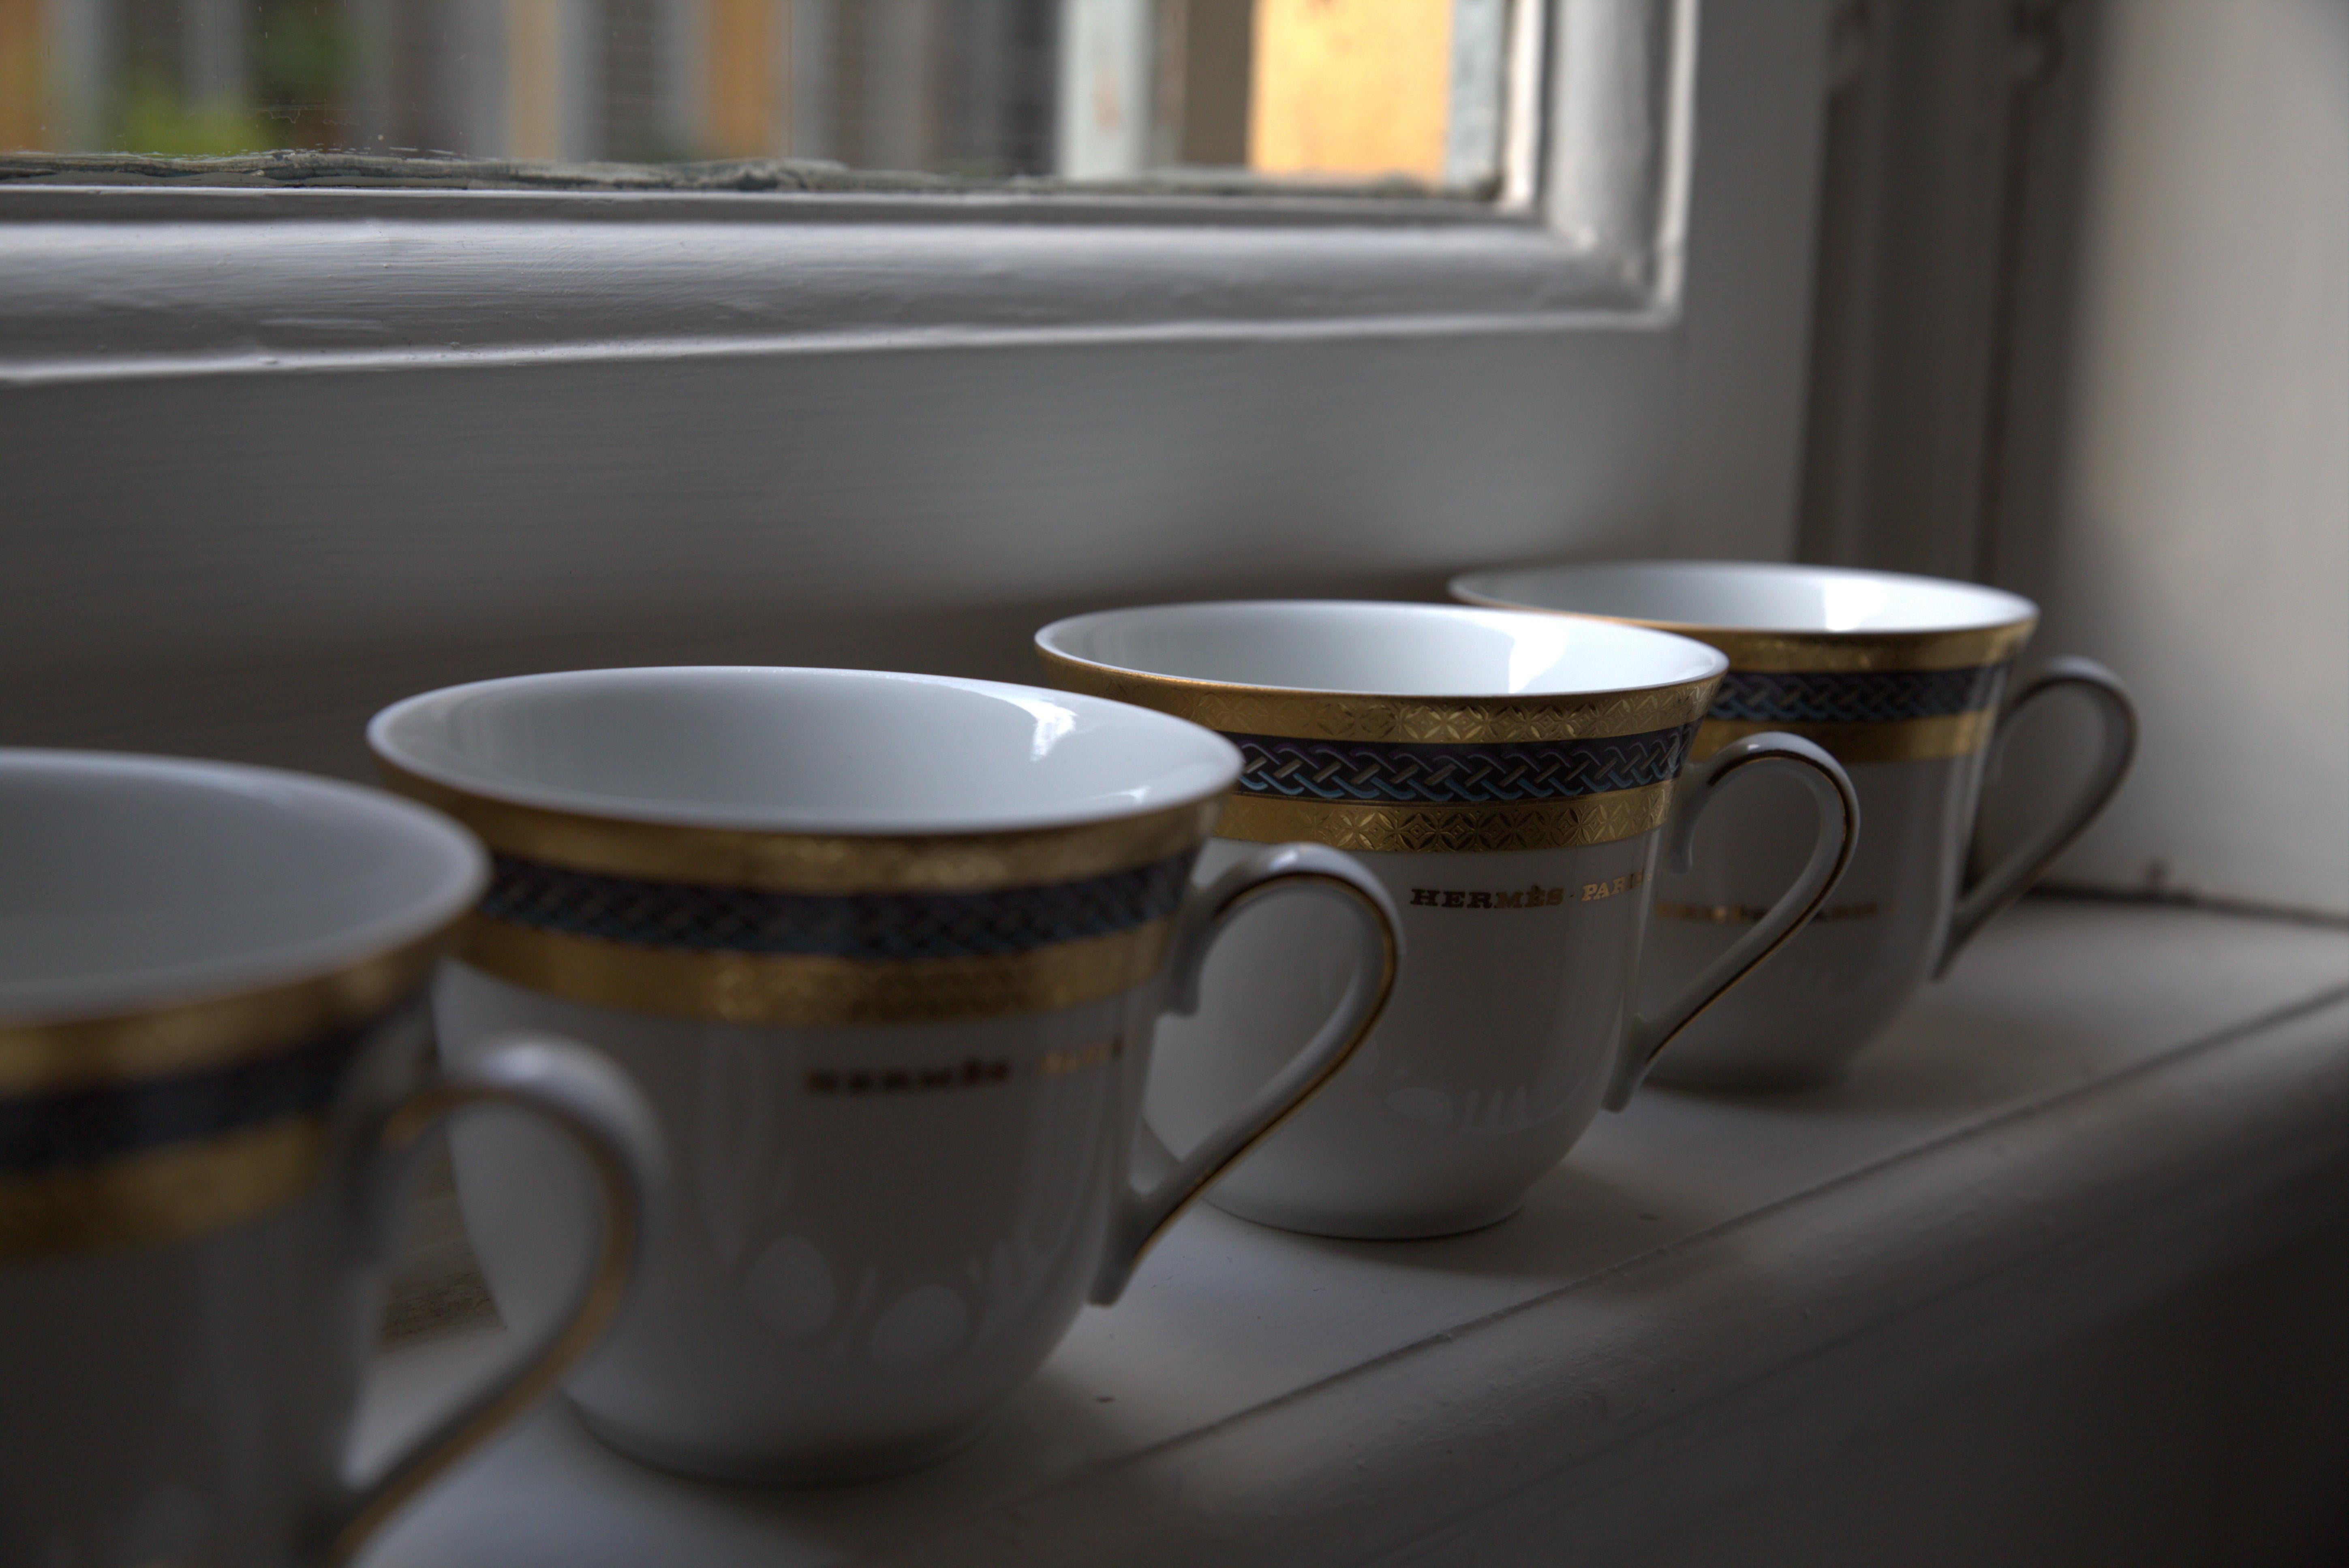 Set of 6 cups of coffee